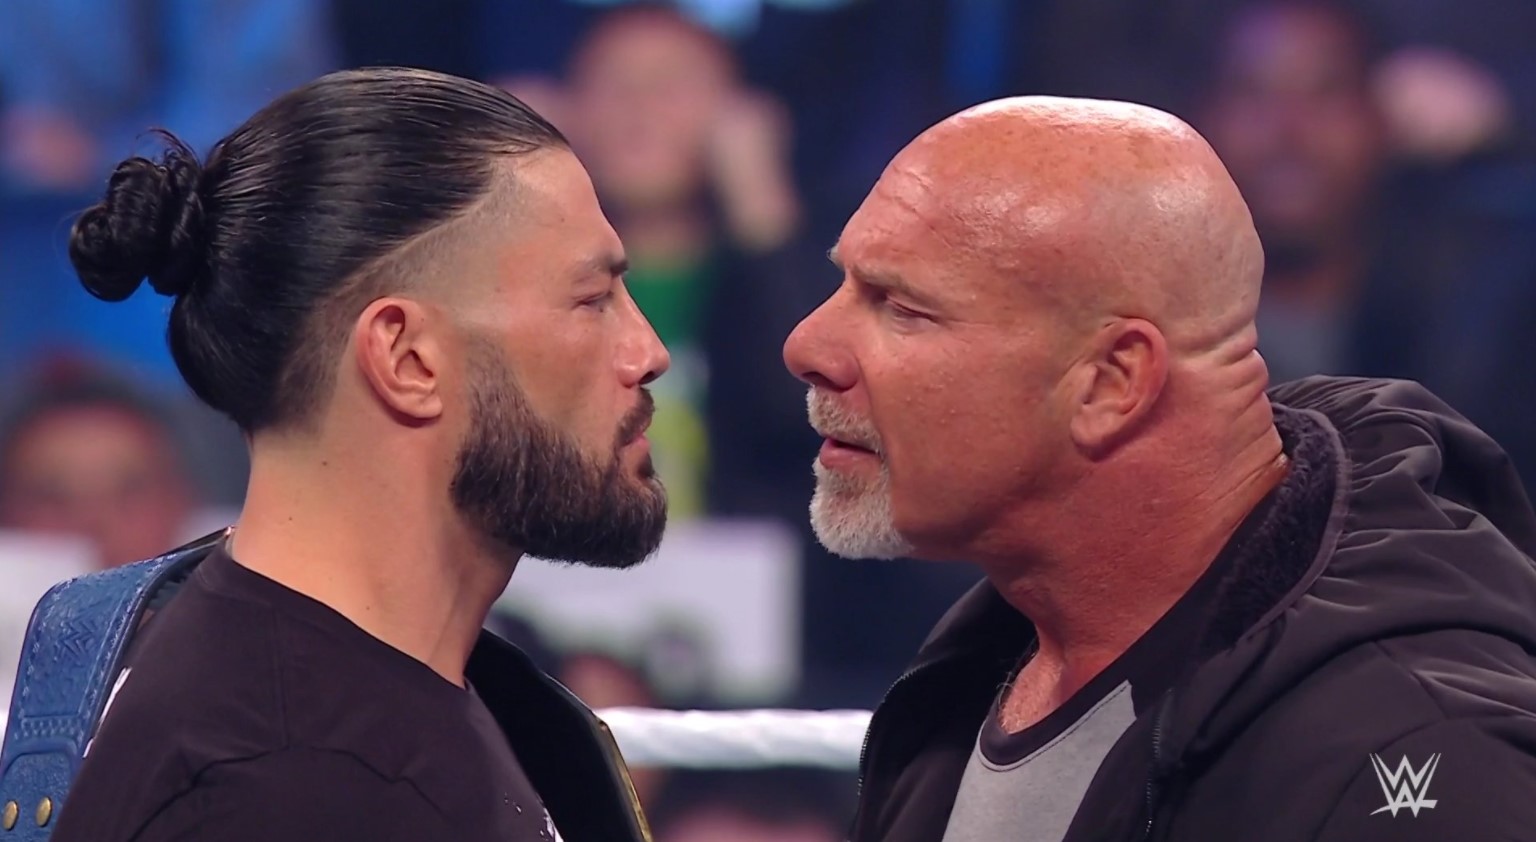 WWE Smackdown Results live blog: Goldberg returns and challenges Roman Reigns for a title match at Elimination Chamber, follow live